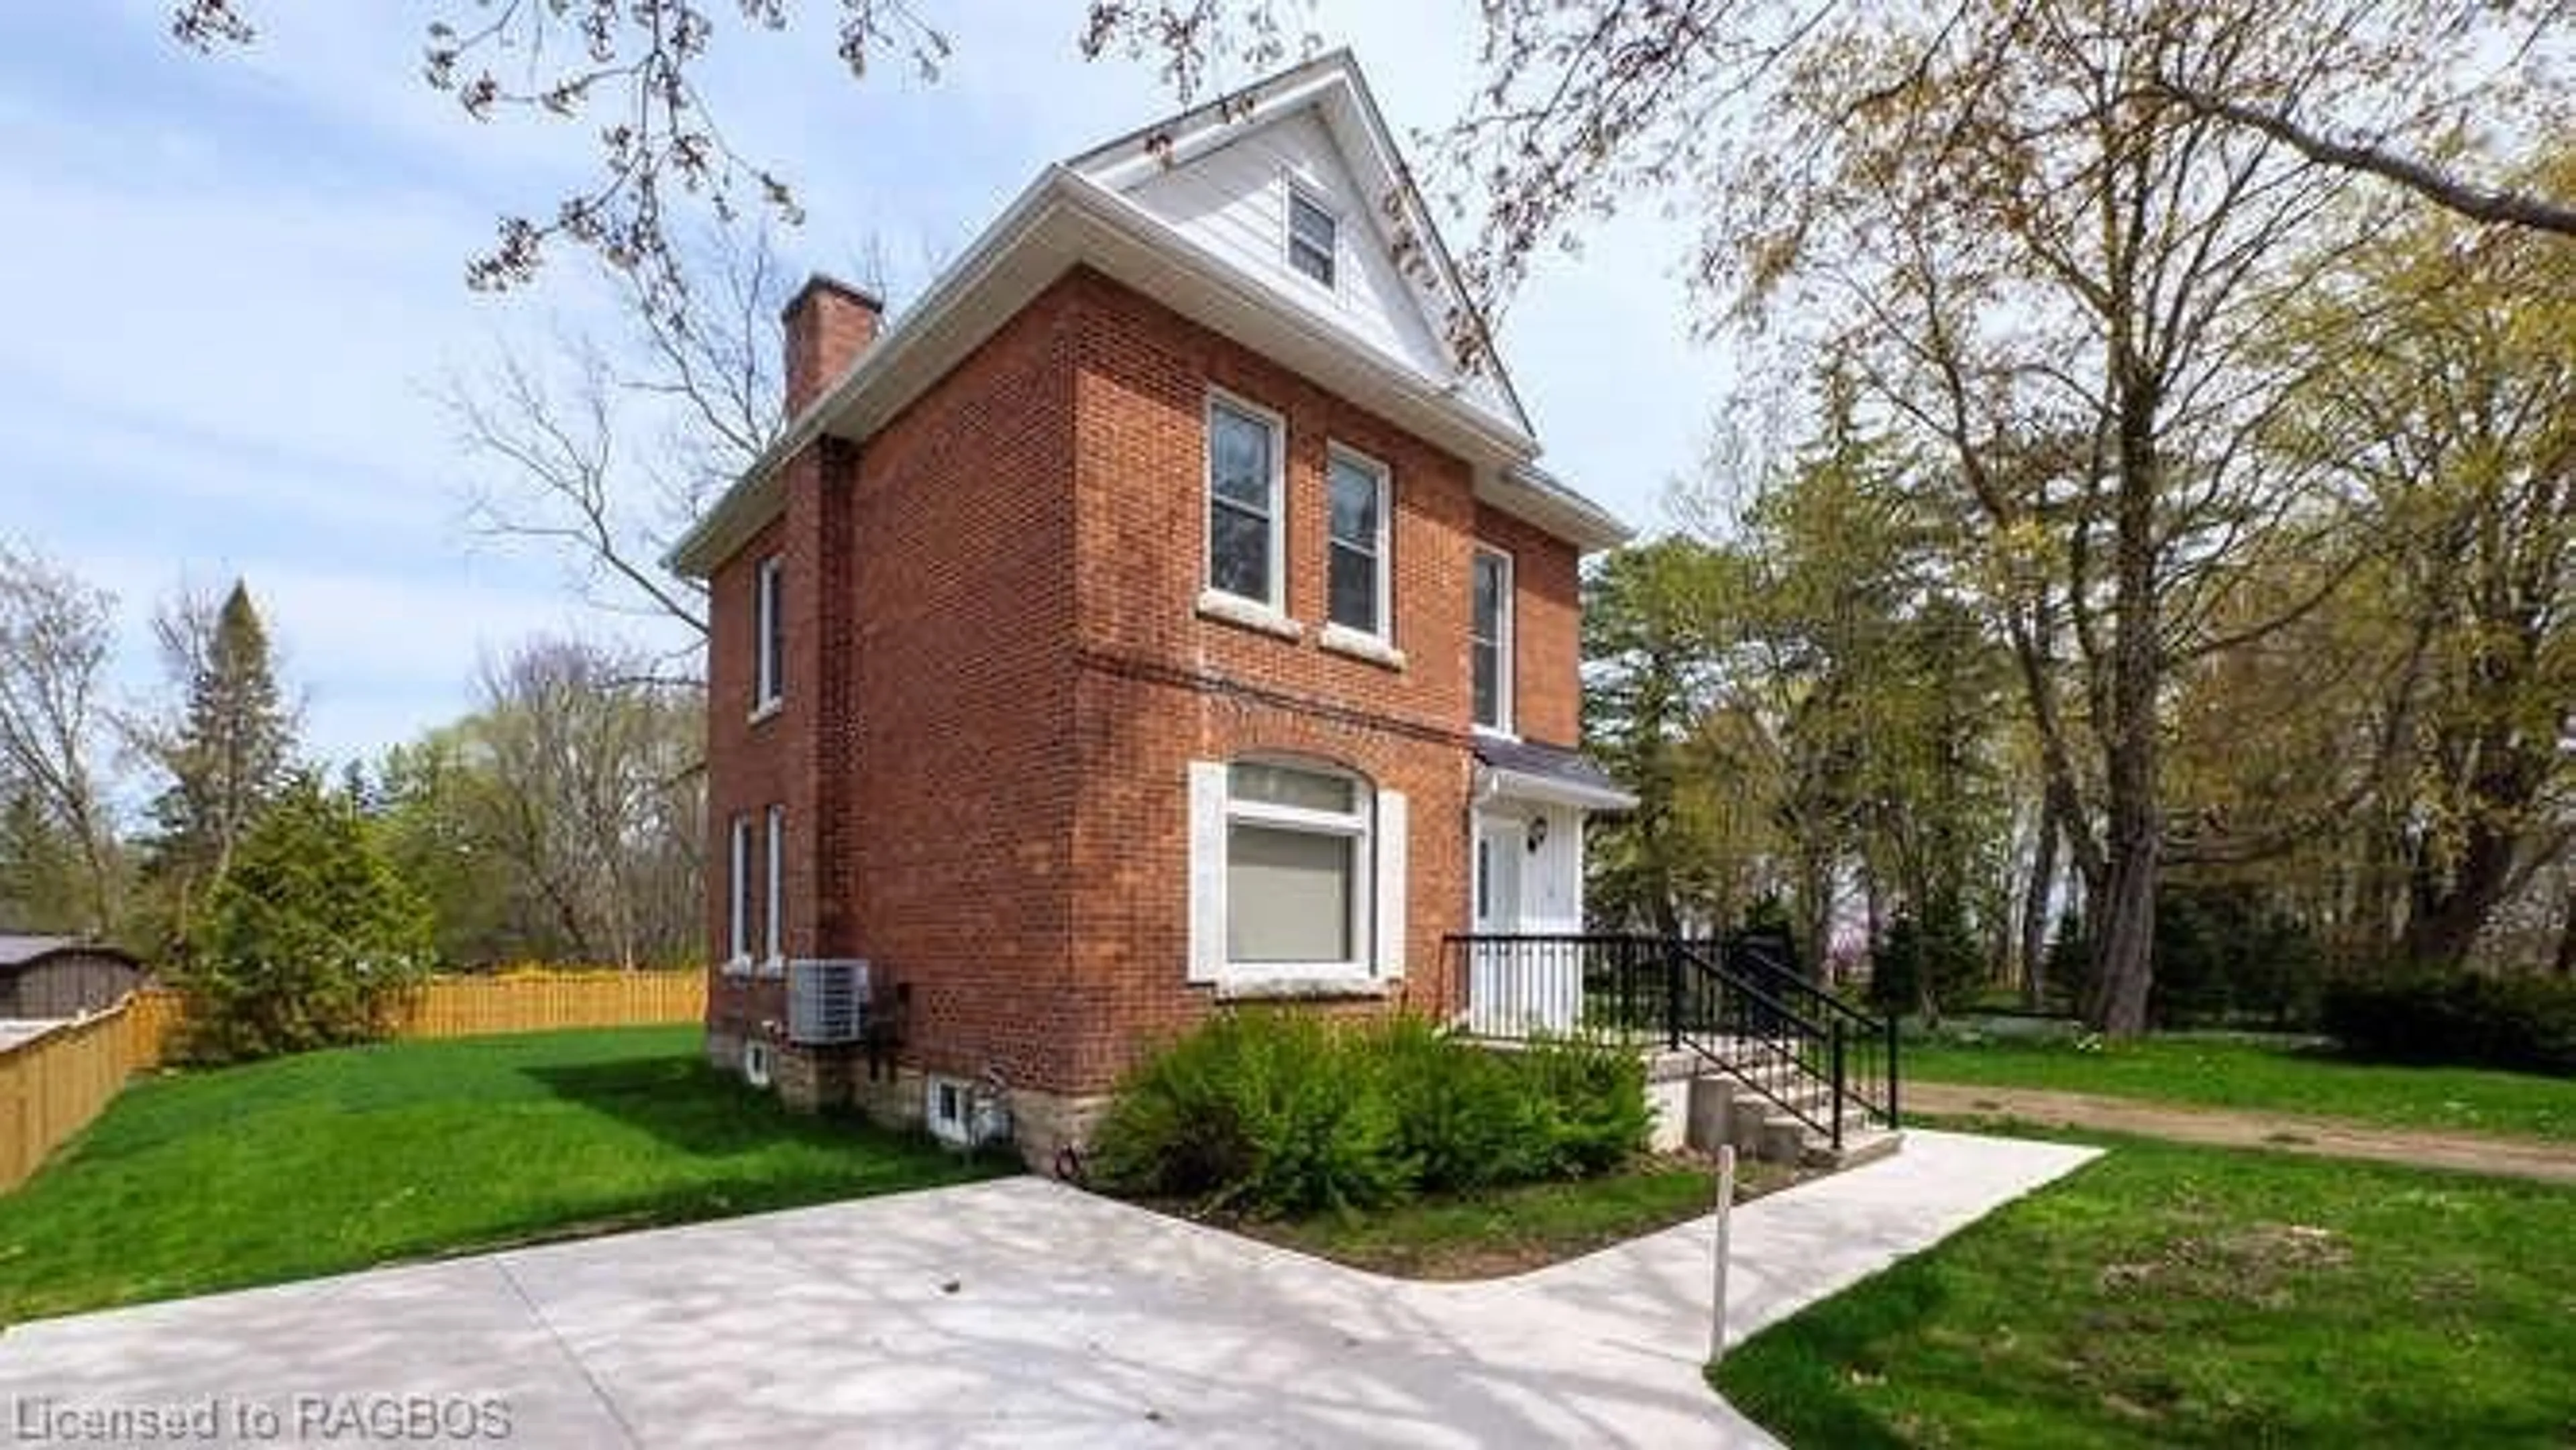 Home with brick exterior material for 550 10th Street A West, Owen Sound Ontario N4K 3R6